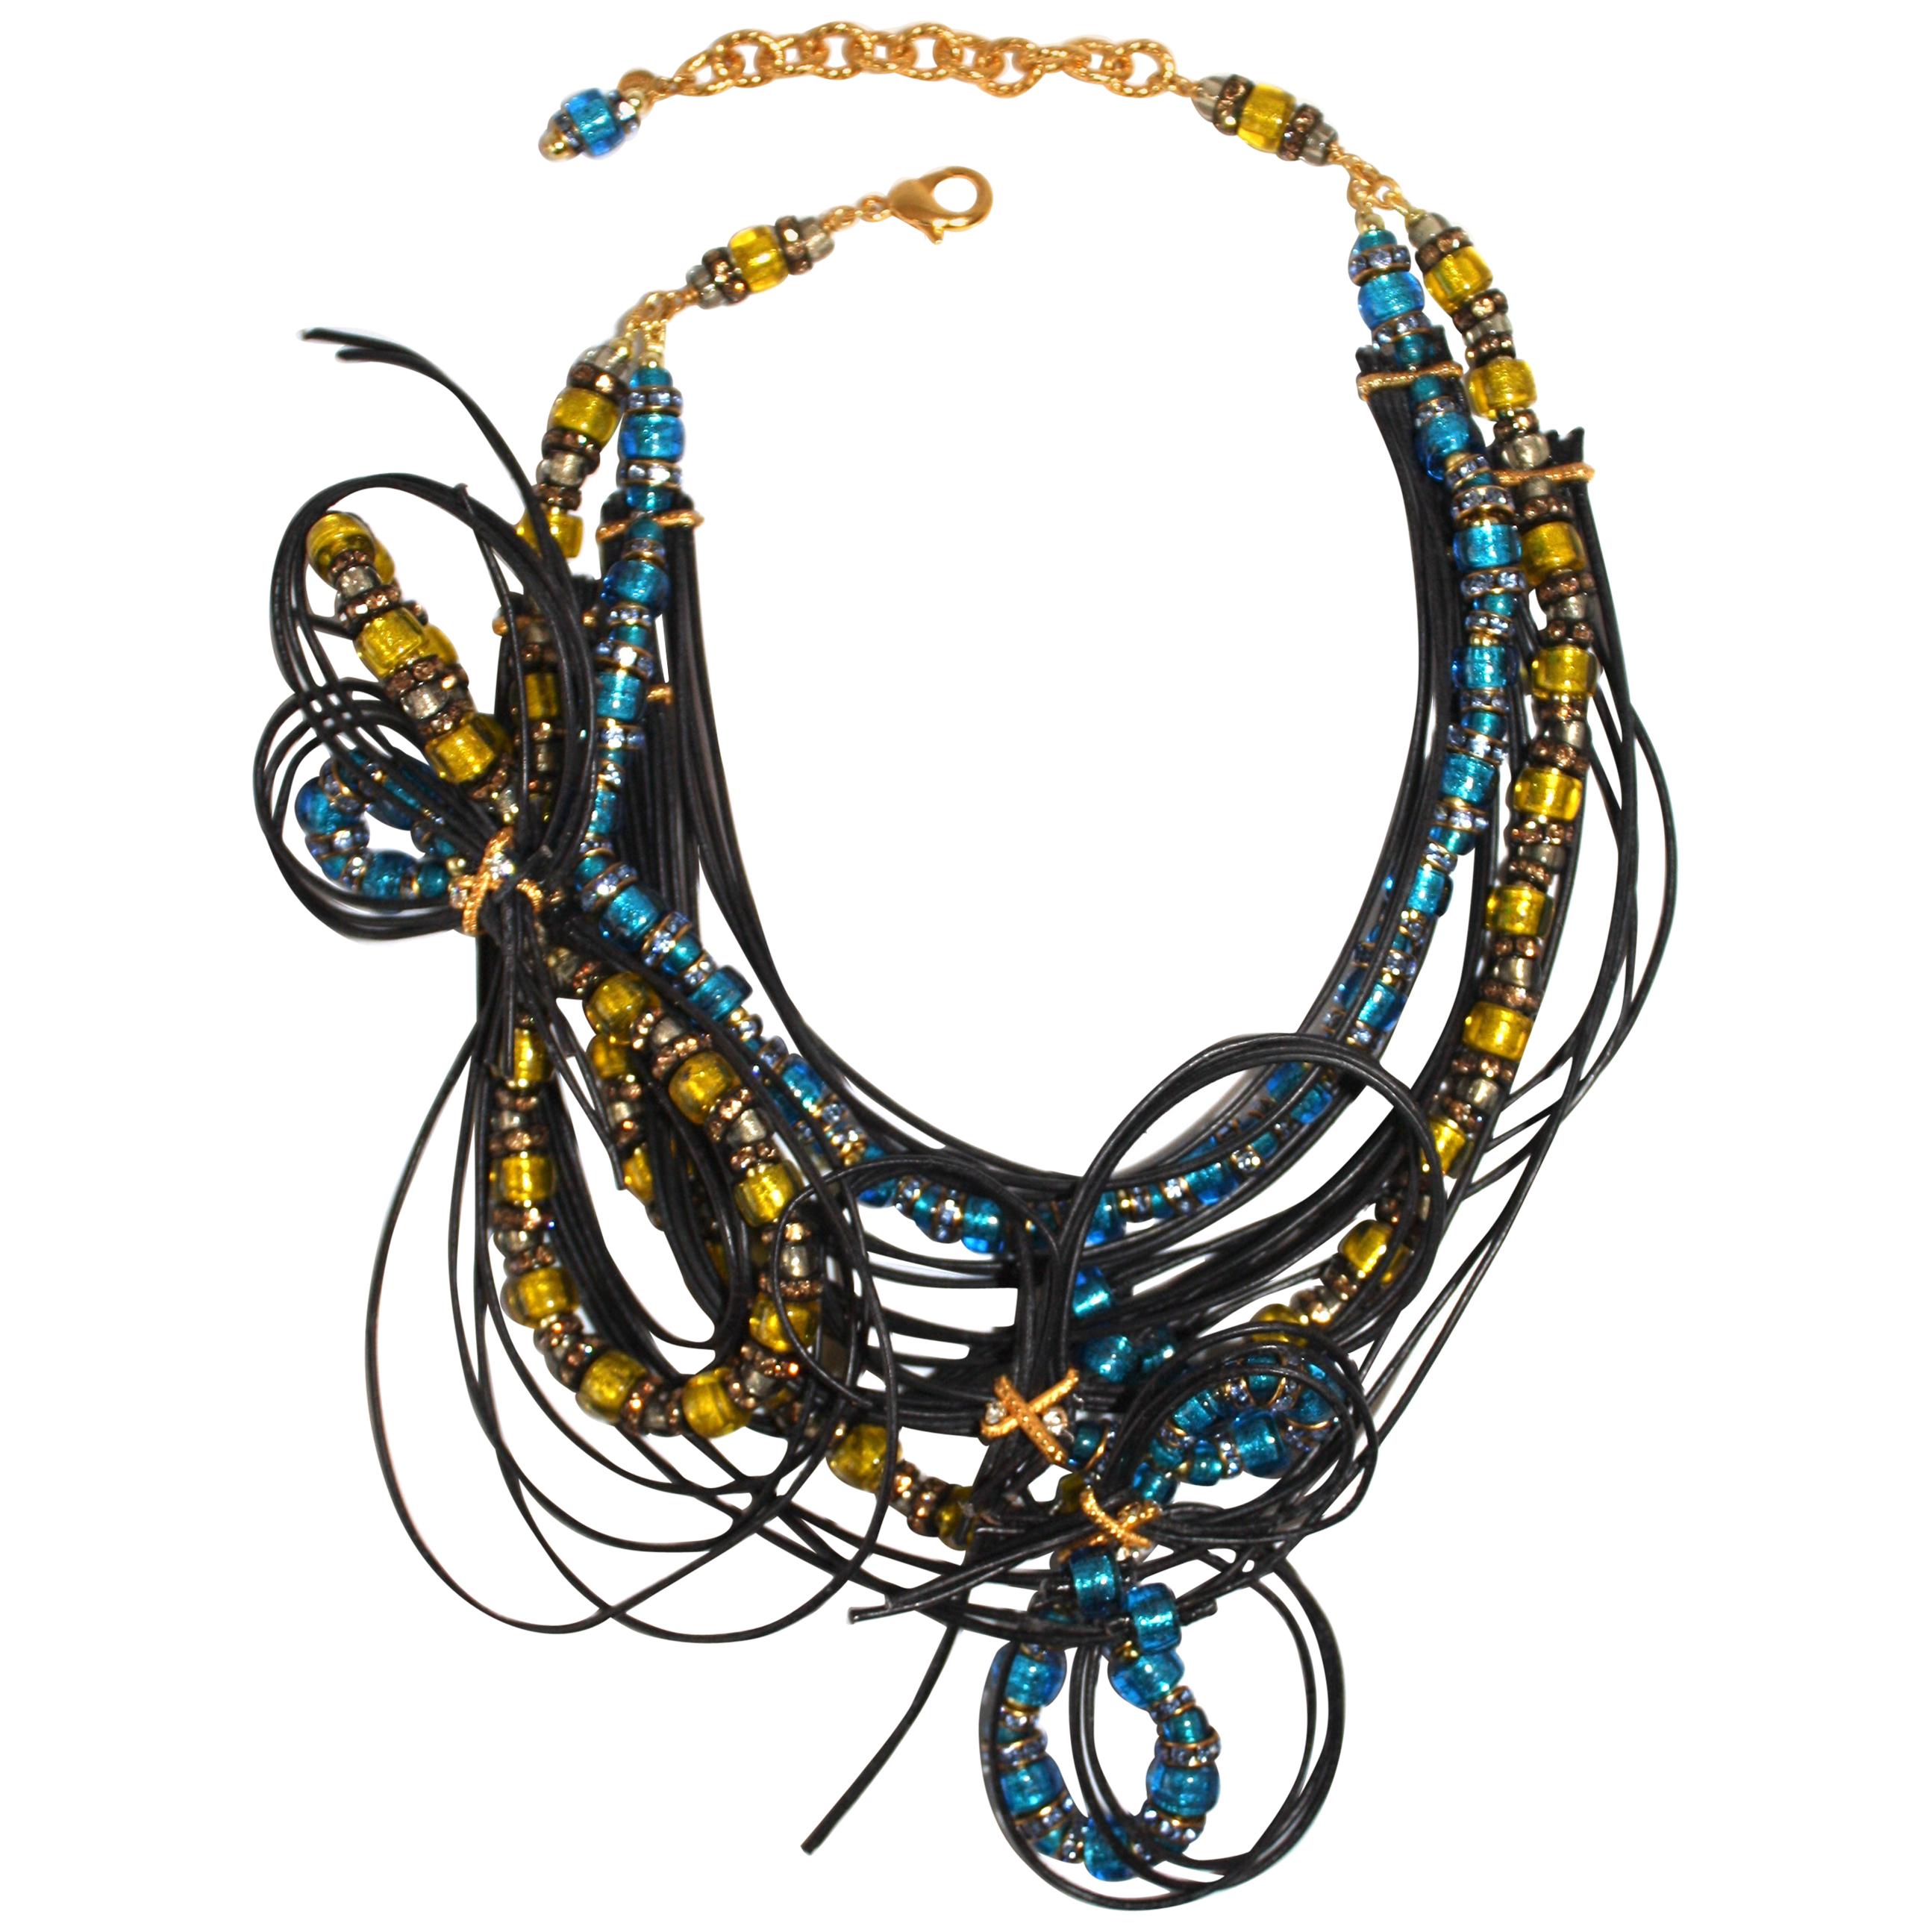 Francoise Montague Leather and Murano Glass Statement Necklace